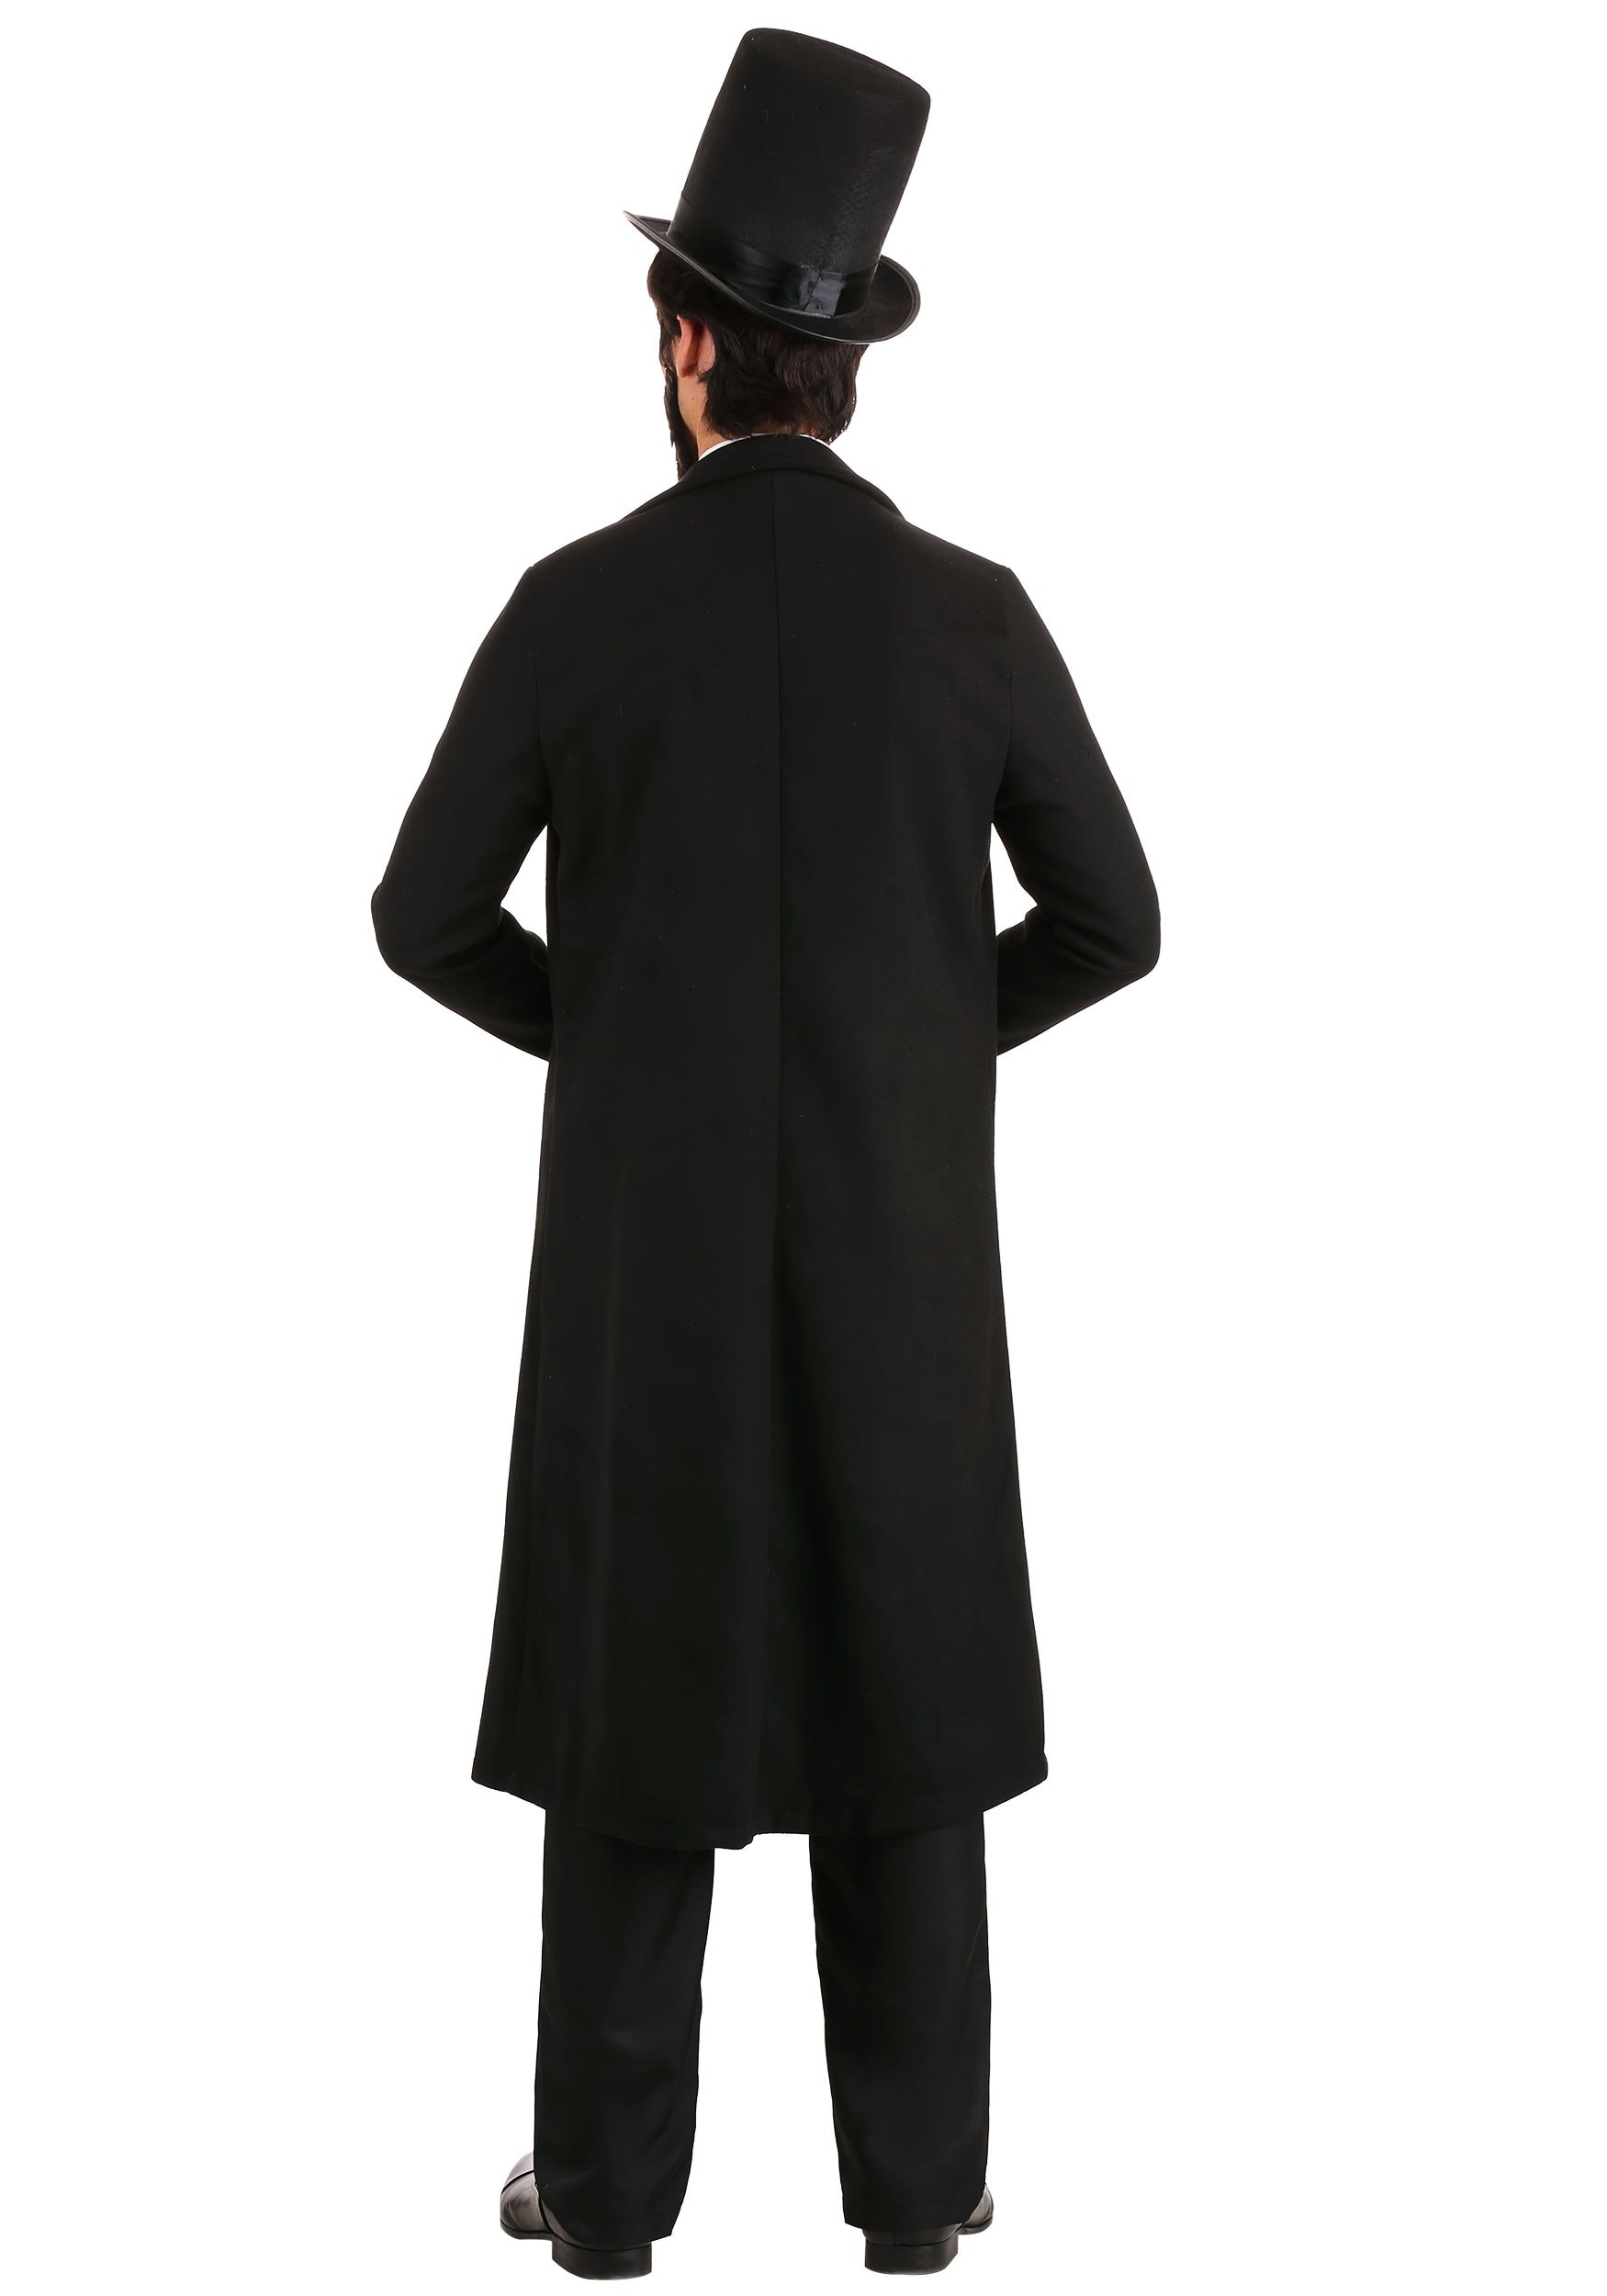 Adults President Abe Lincoln Costume